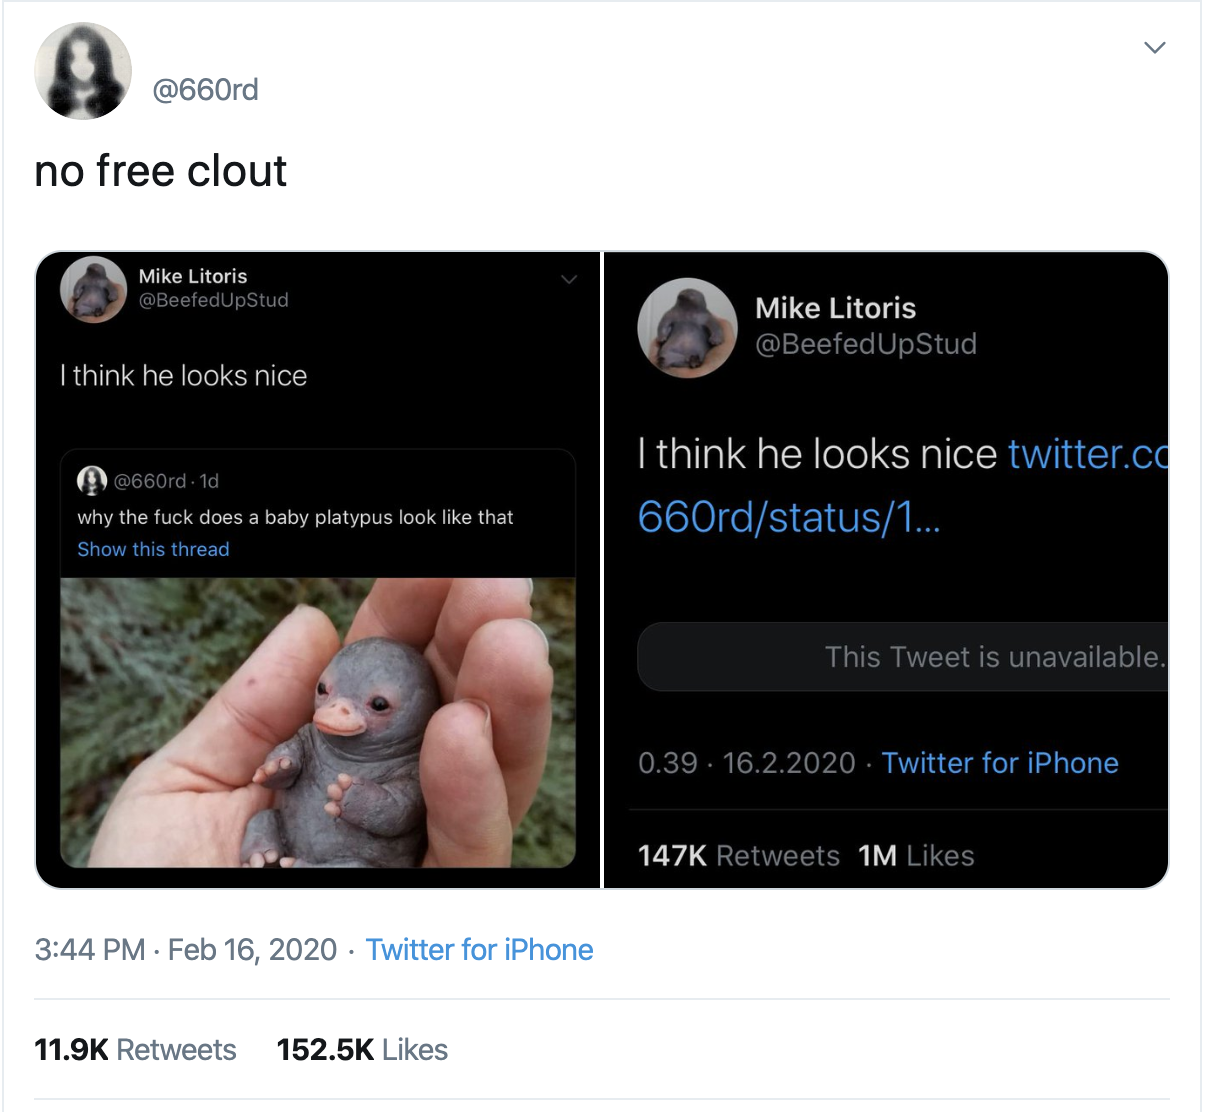 What Does ‘No Free Clout’ Mean?